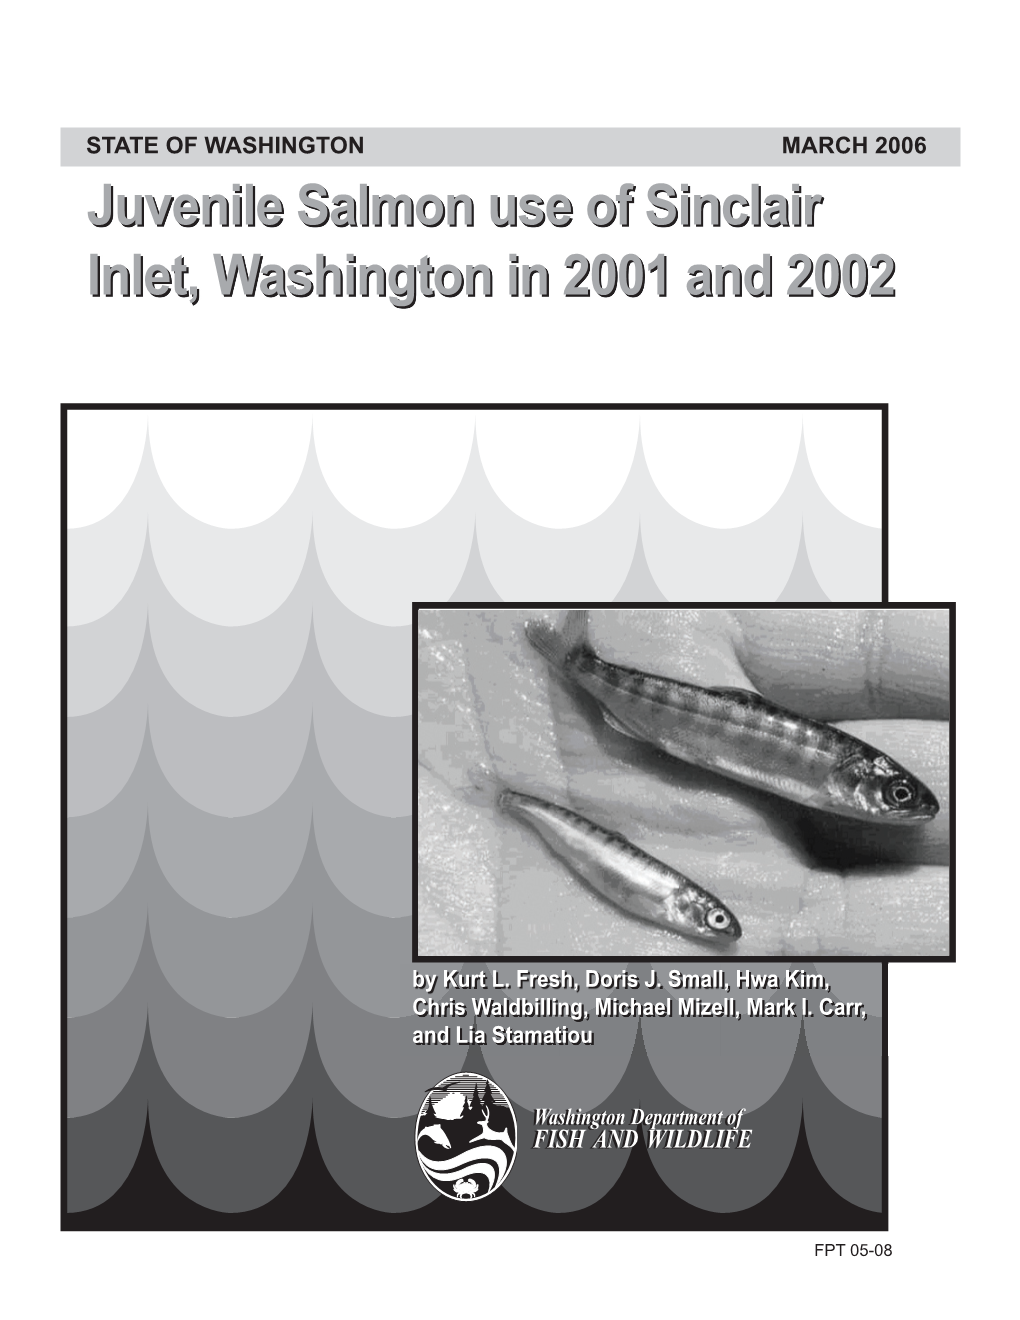 Juvenile Salmon Use of Sinclair Inlet, Washington in 2001 and 2002